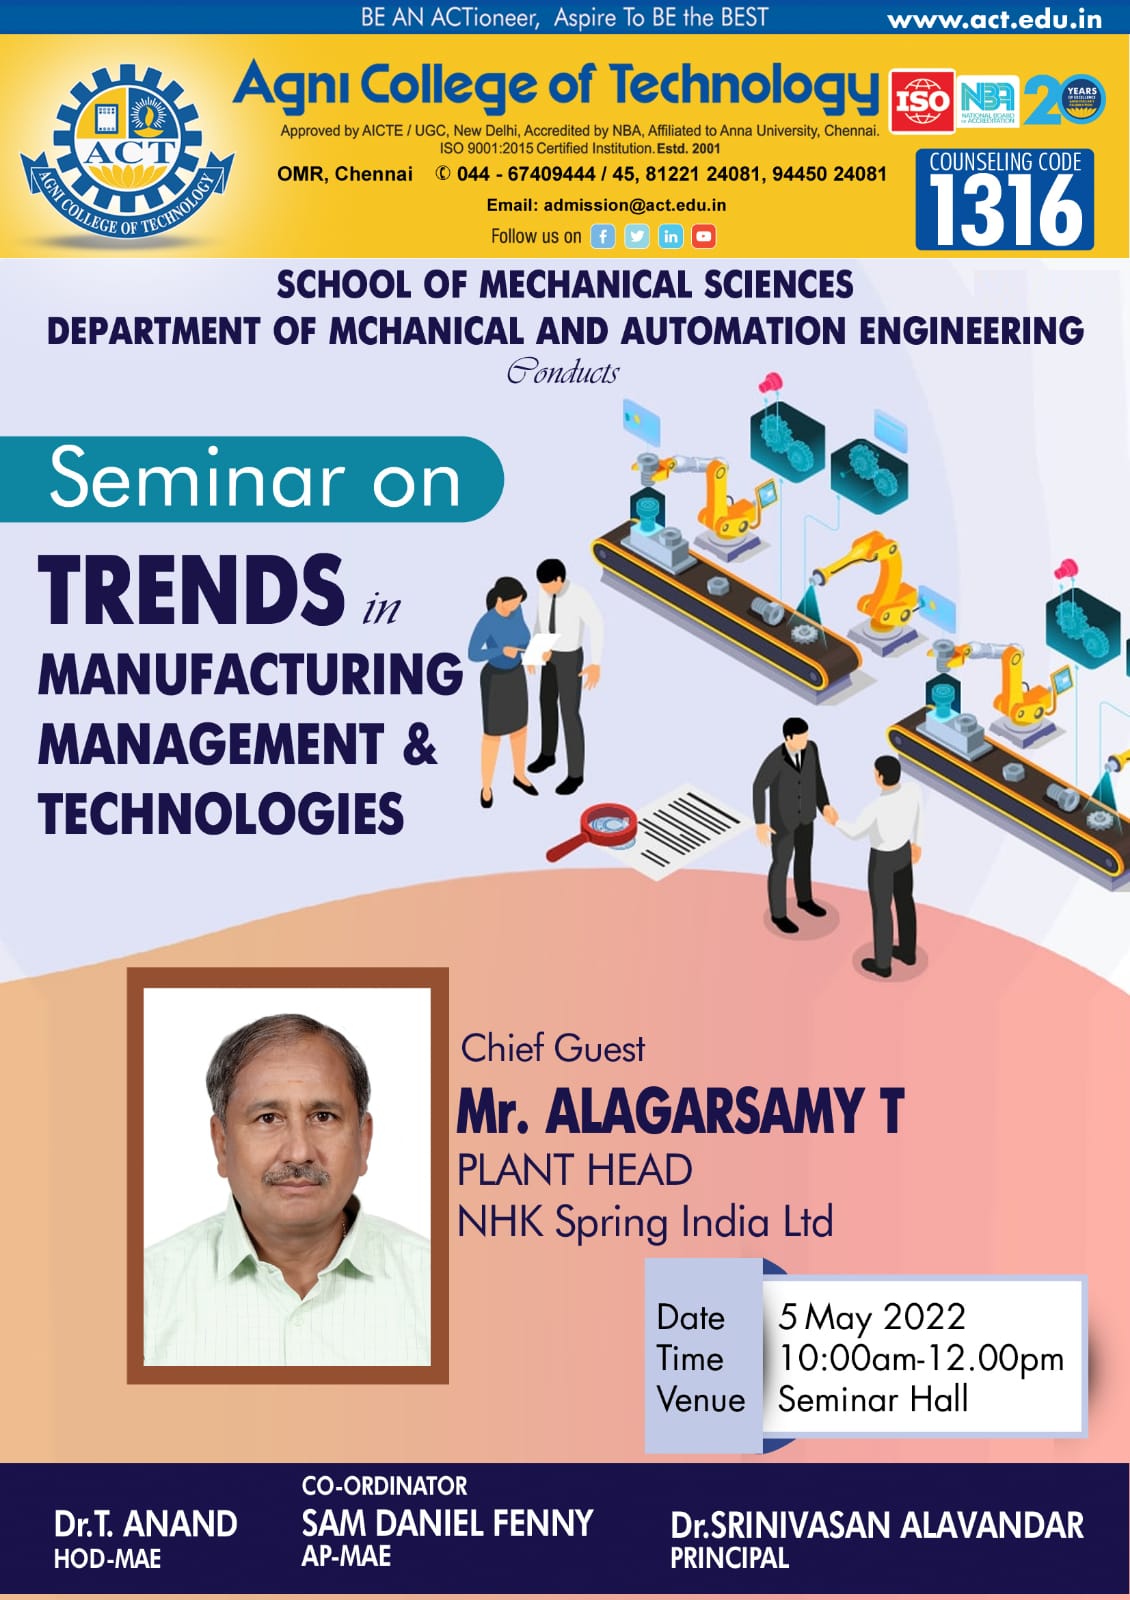 Seminar on trends in manufacturing management and technologies